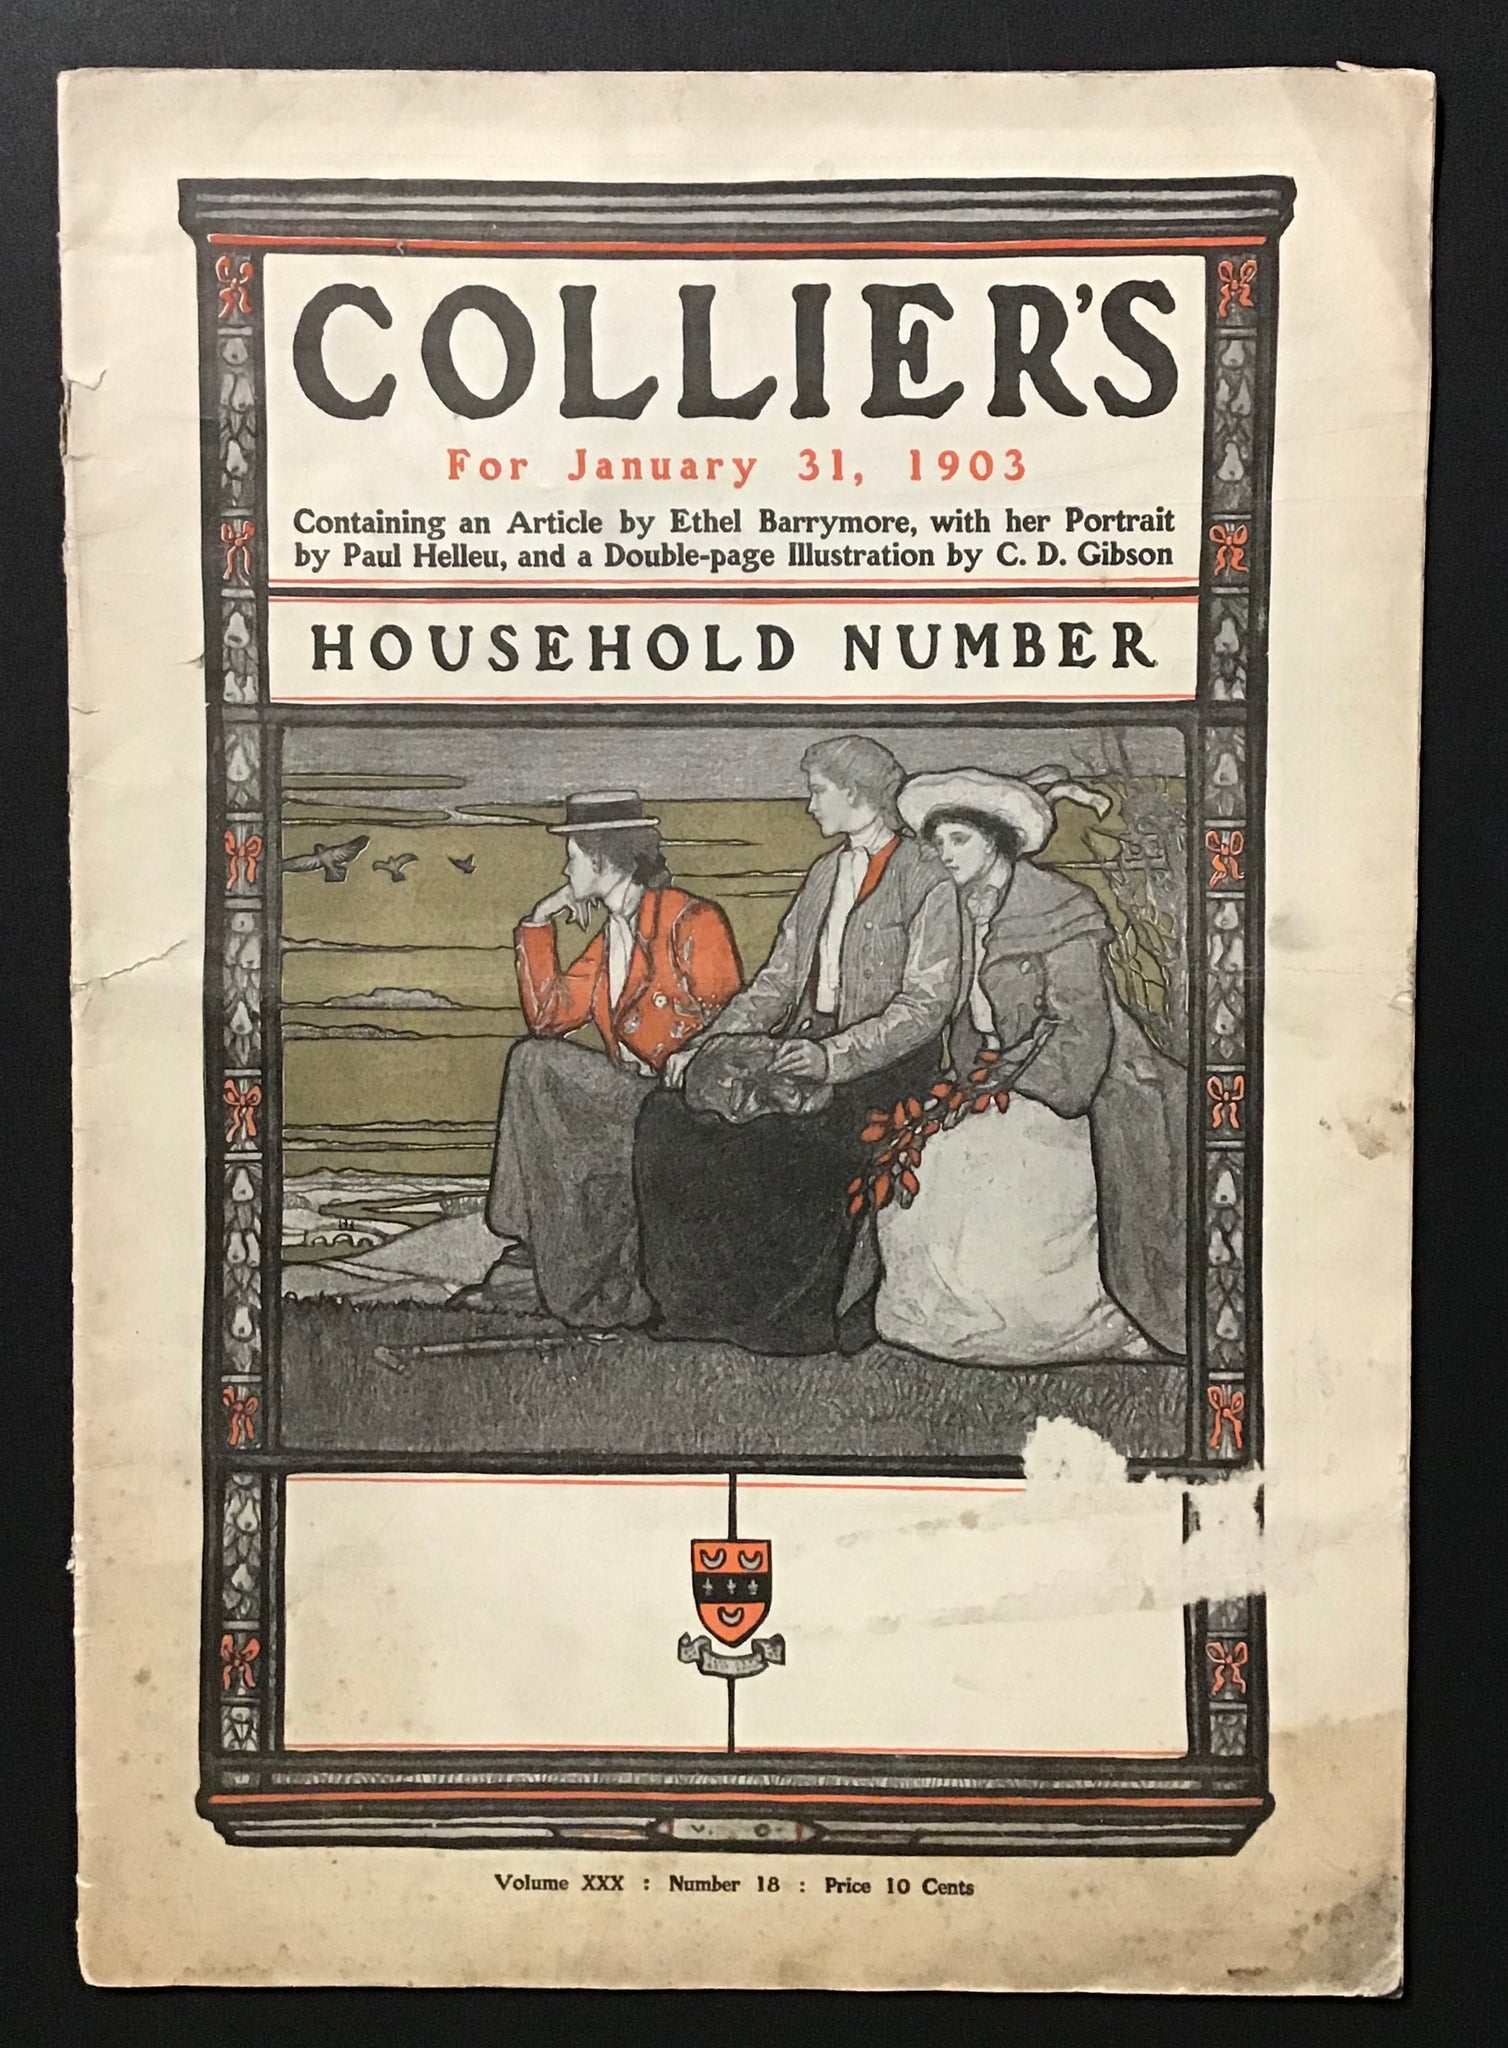 Collier's - For January 31, 1903